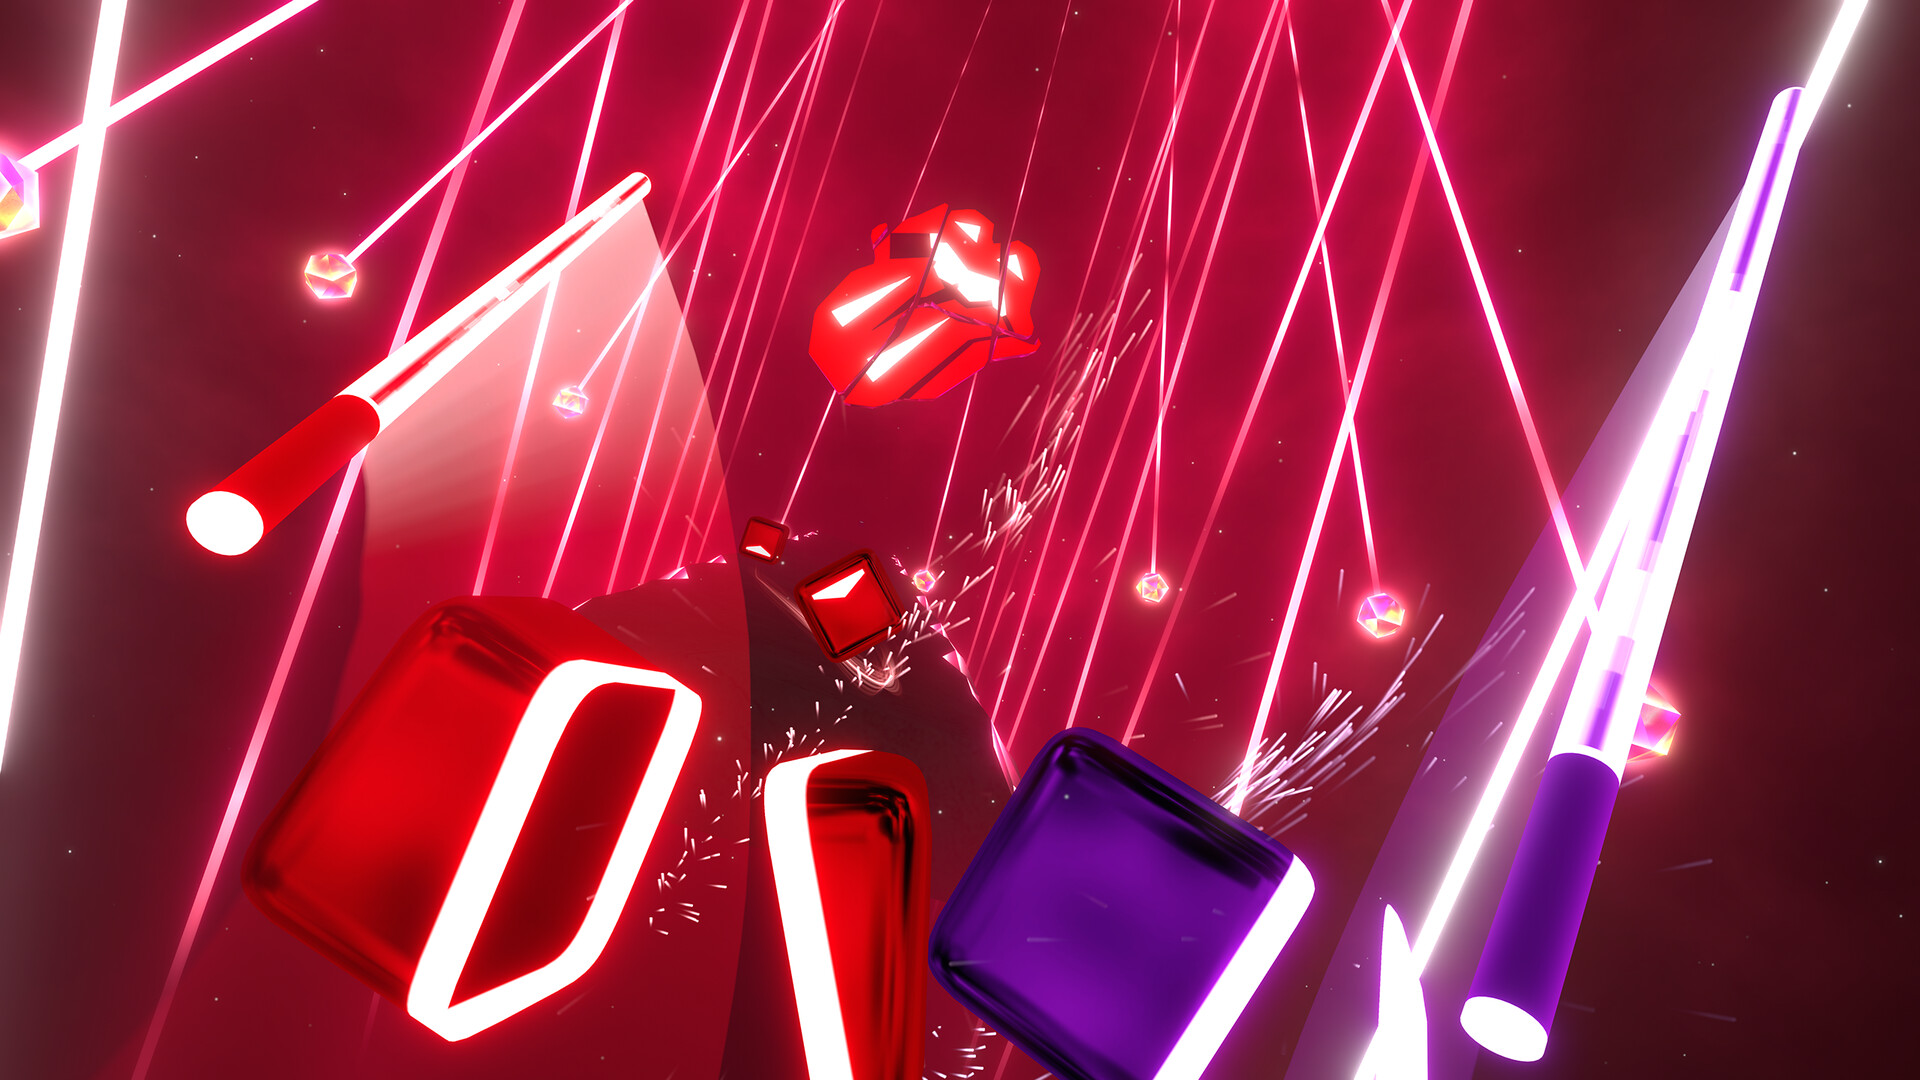 Beat Saber - The Rolling Stones - "Sympathy For The Devil" Featured Screenshot #1